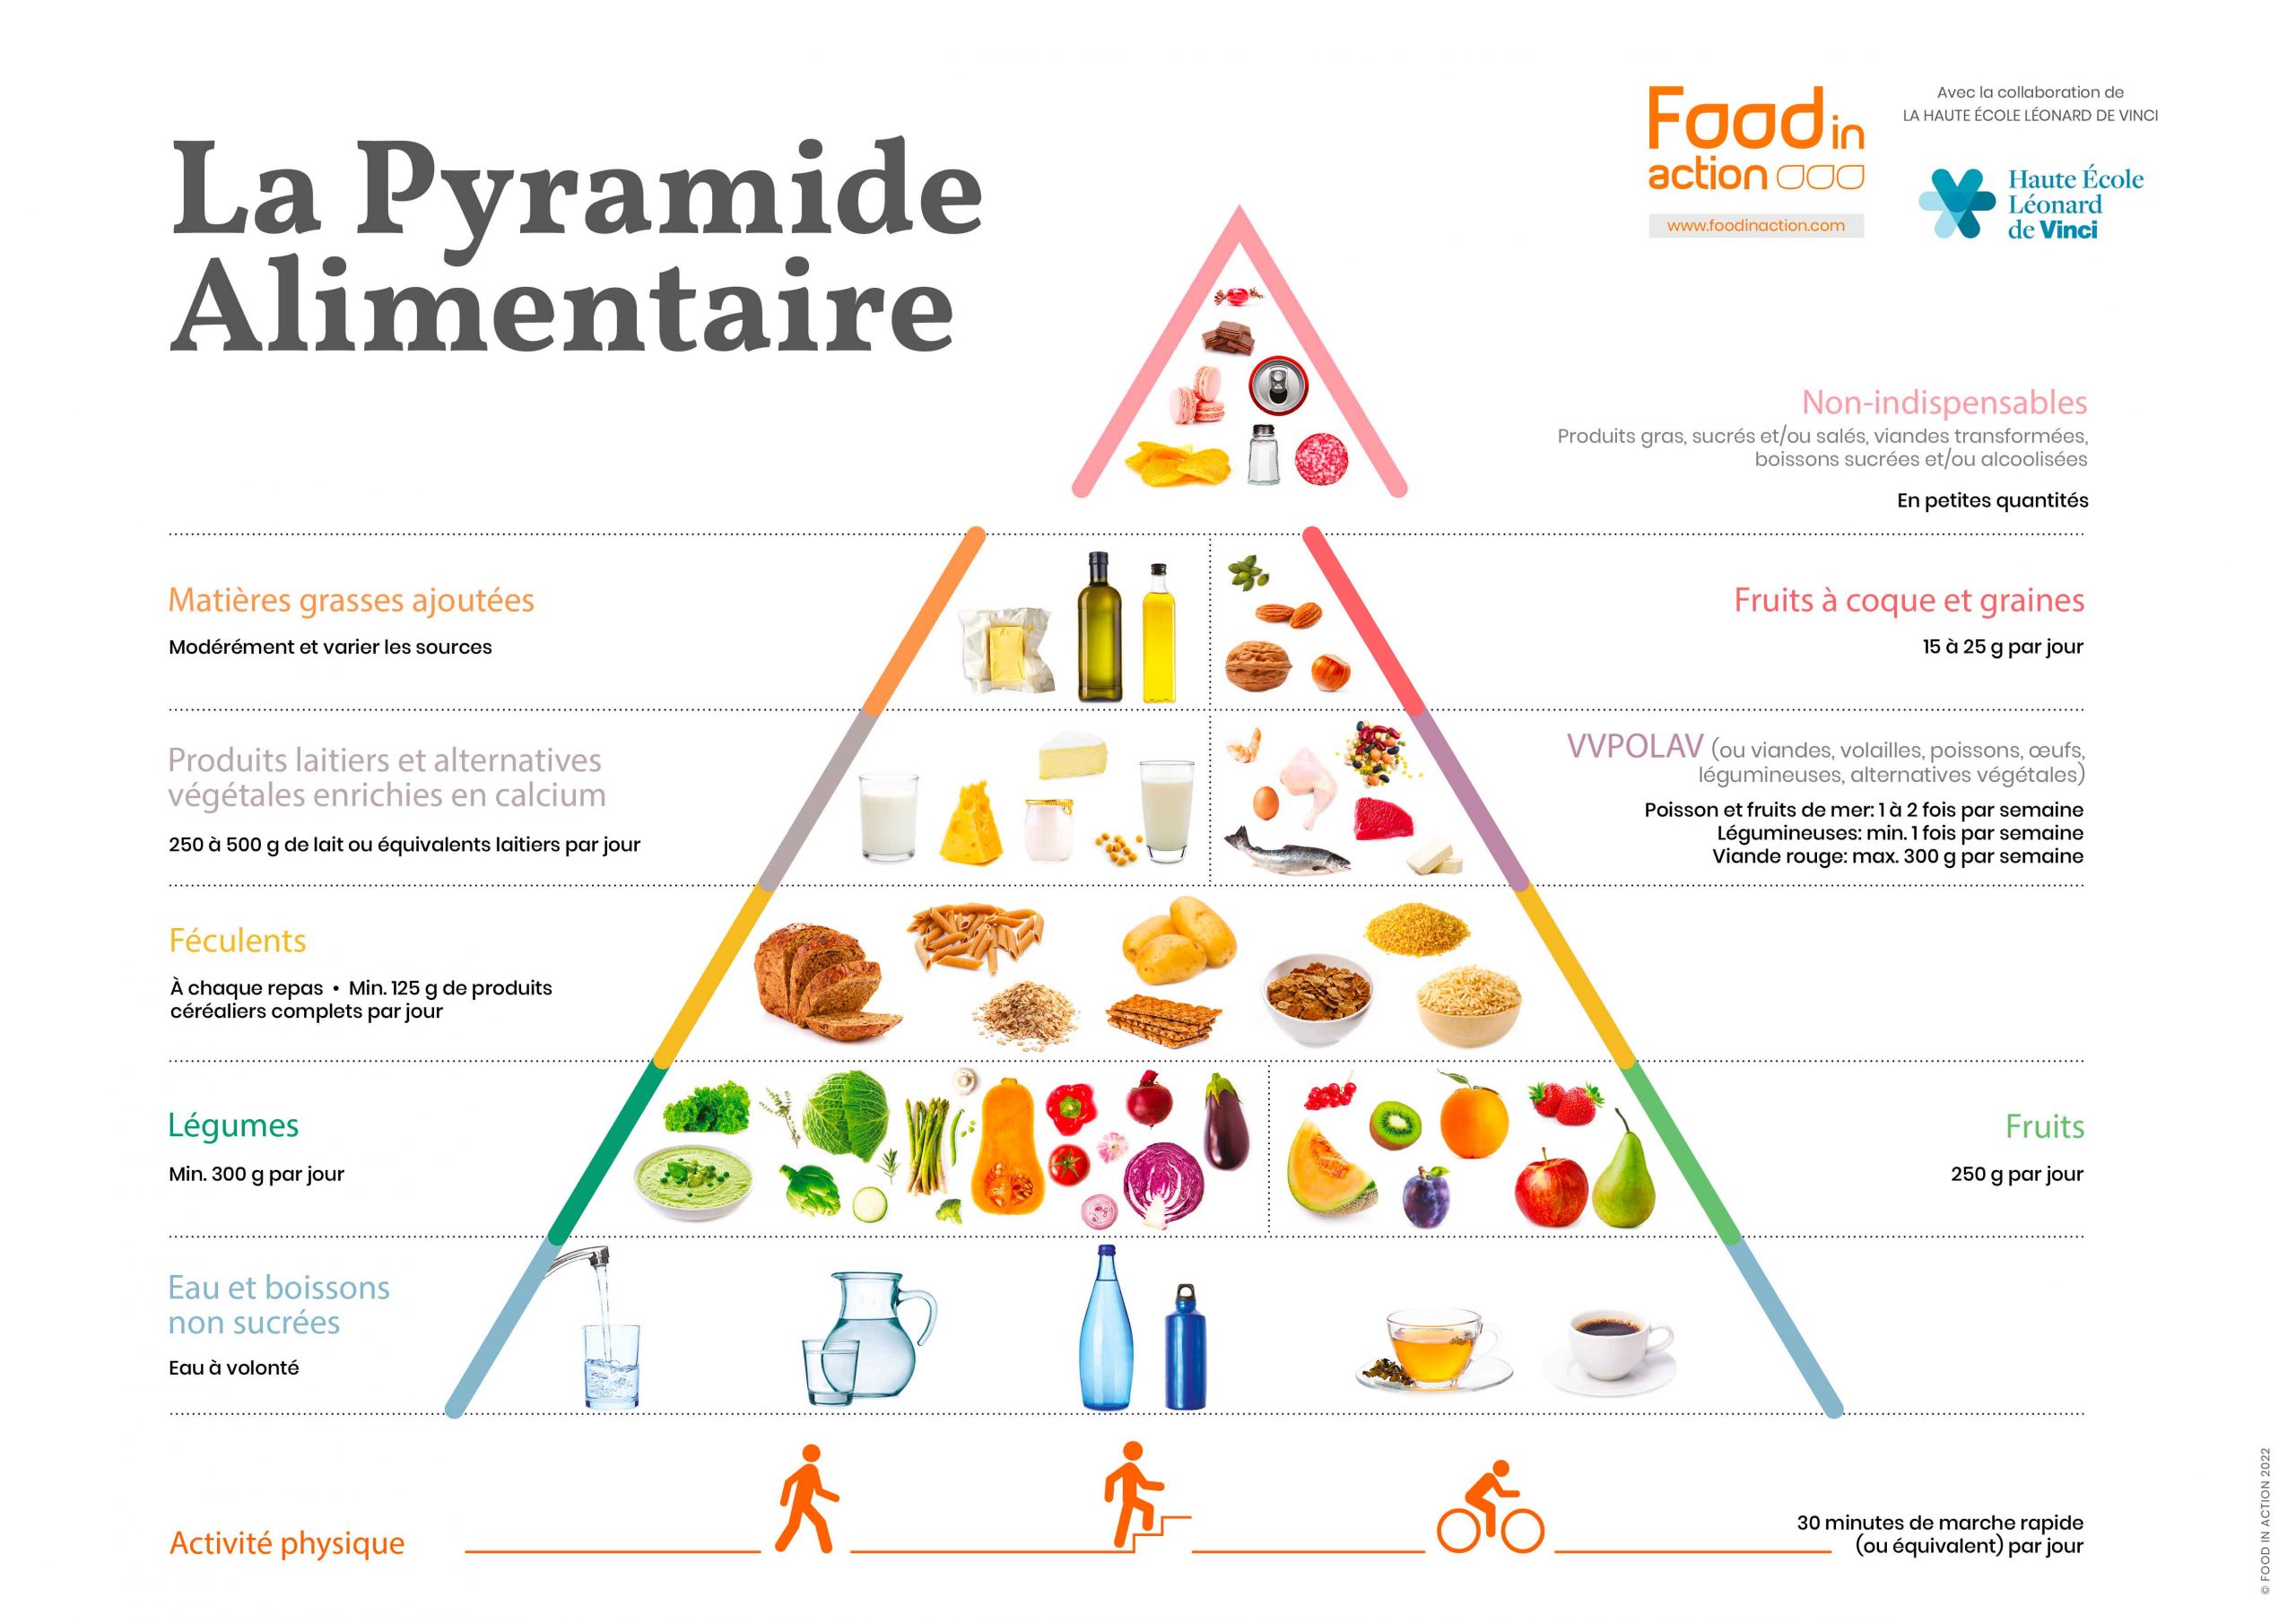 pyramide alimentaire 2020 familles recommandations alimentaires